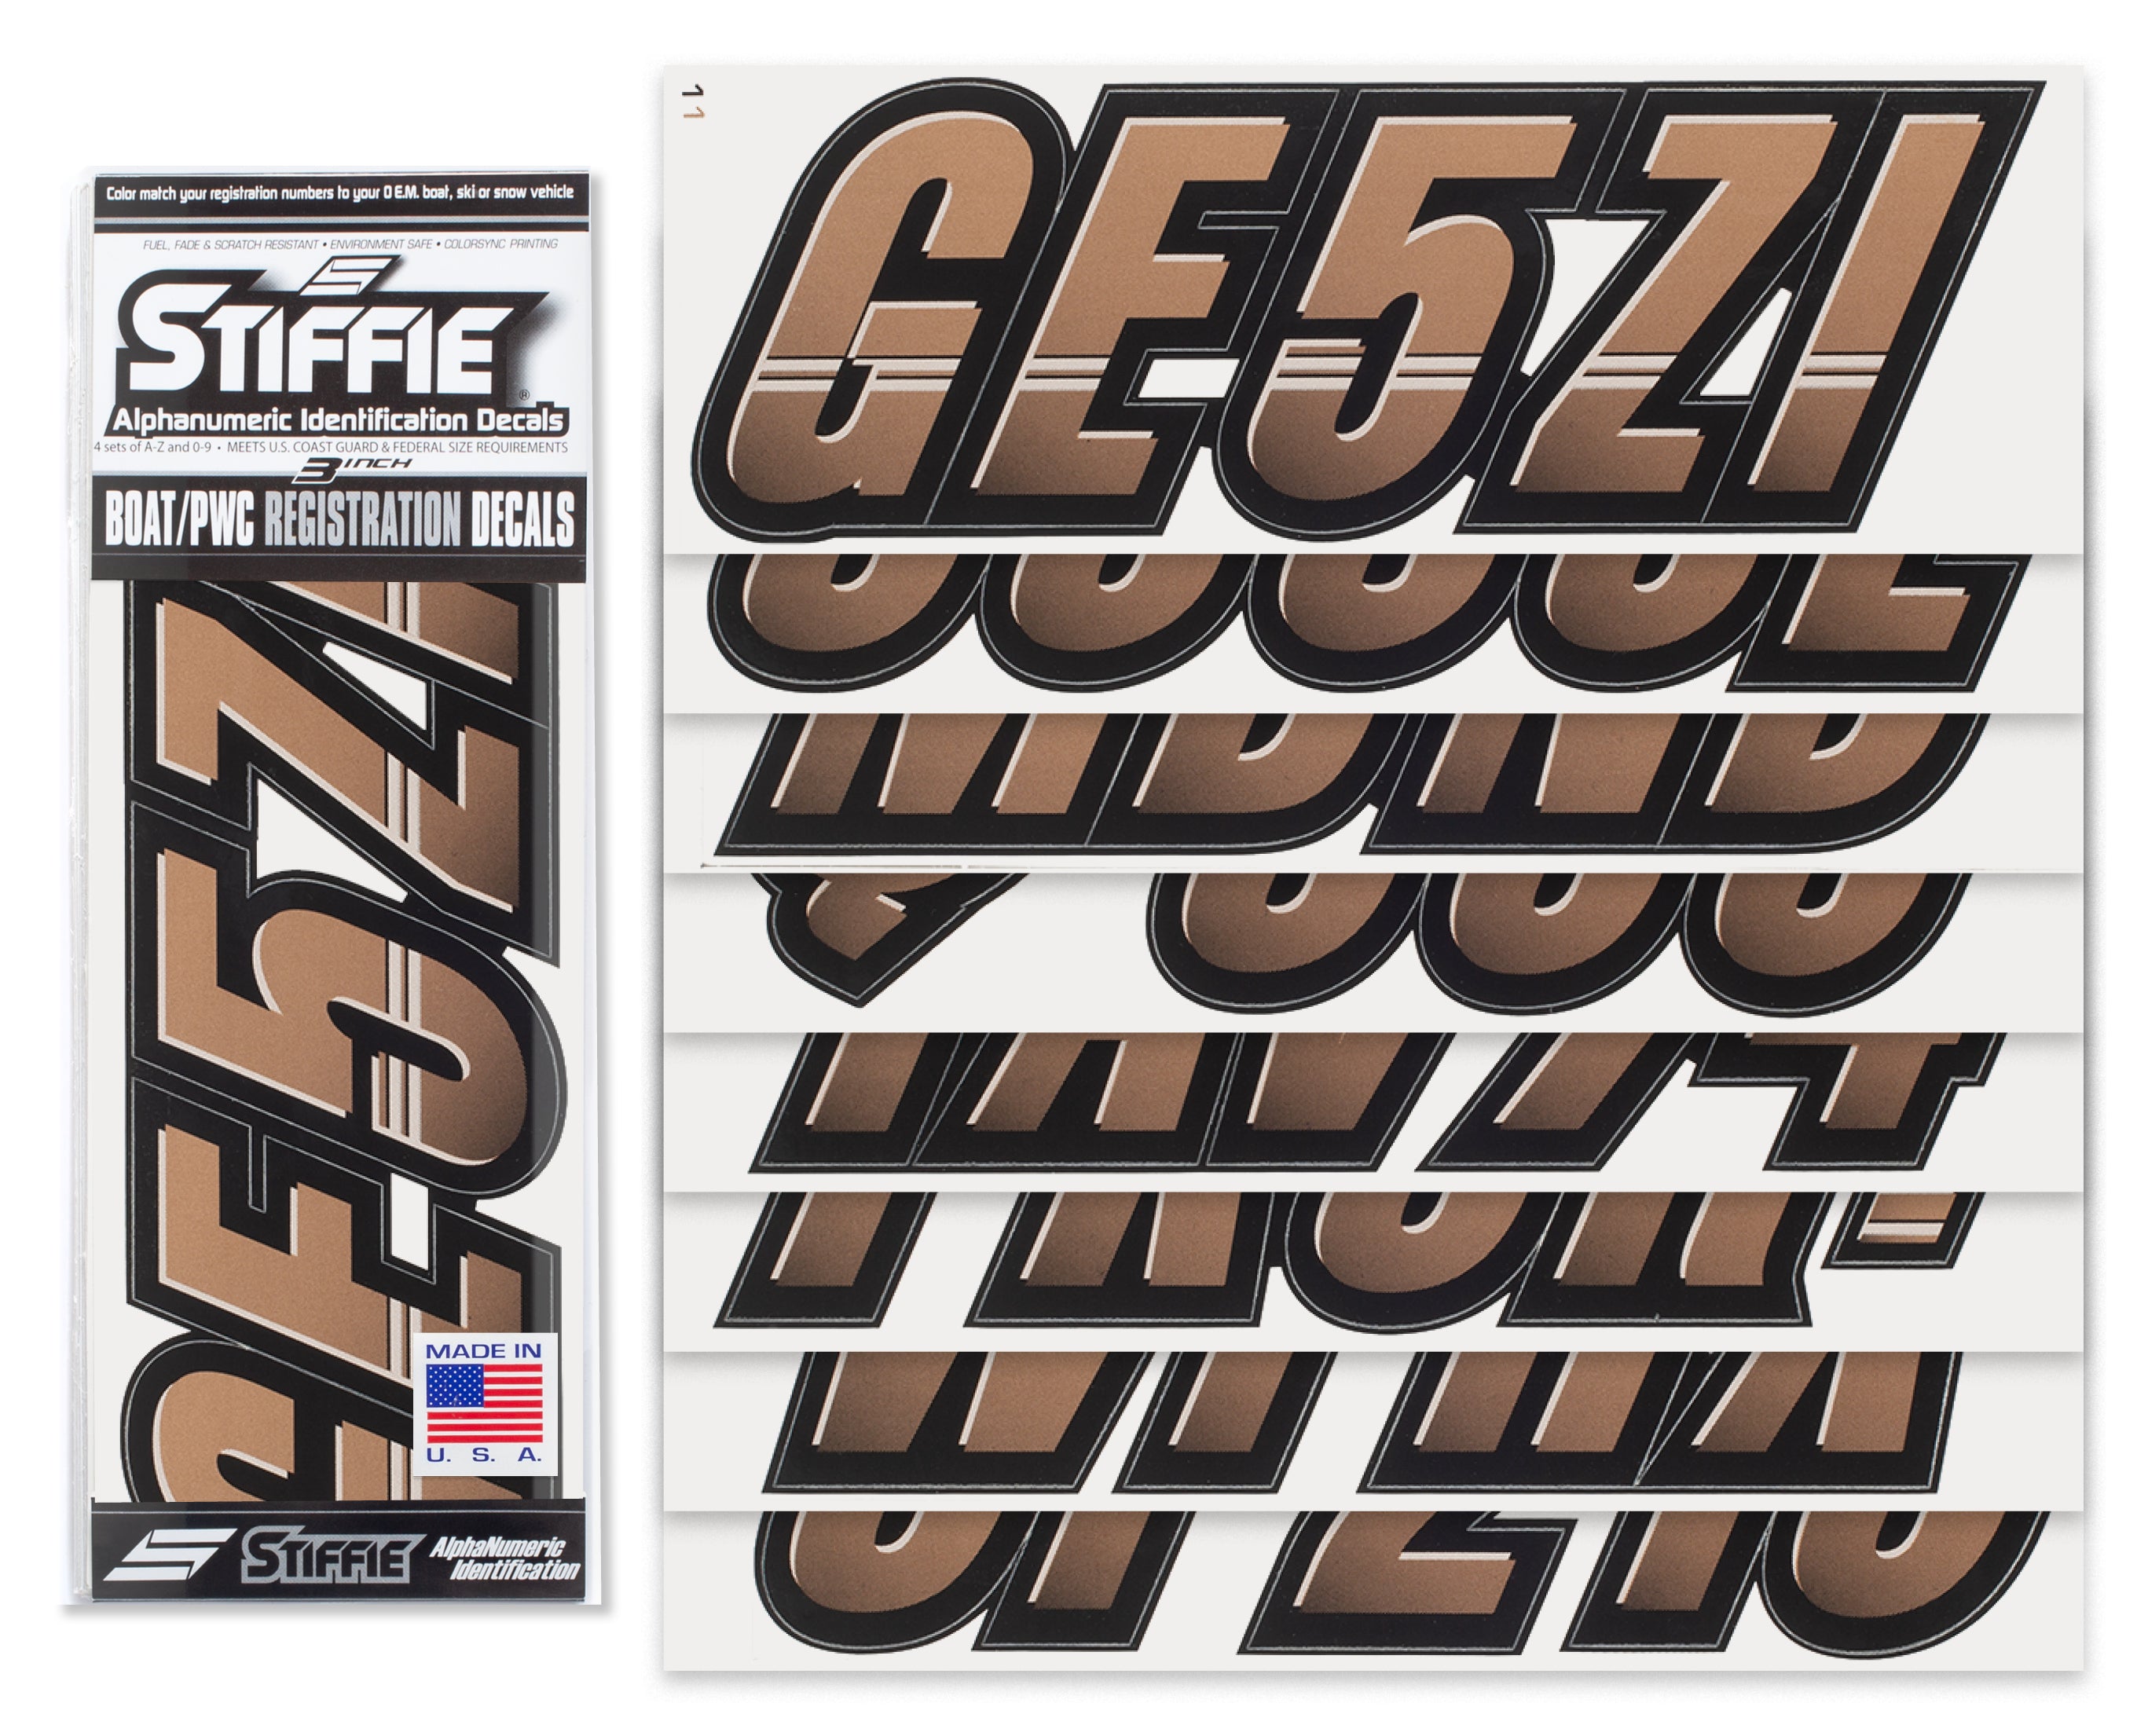 Techtron Metallic Copper/Black 3" Alpha-Numeric Registration Identification Numbers Stickers Decals for Boats & Personal Watercraft